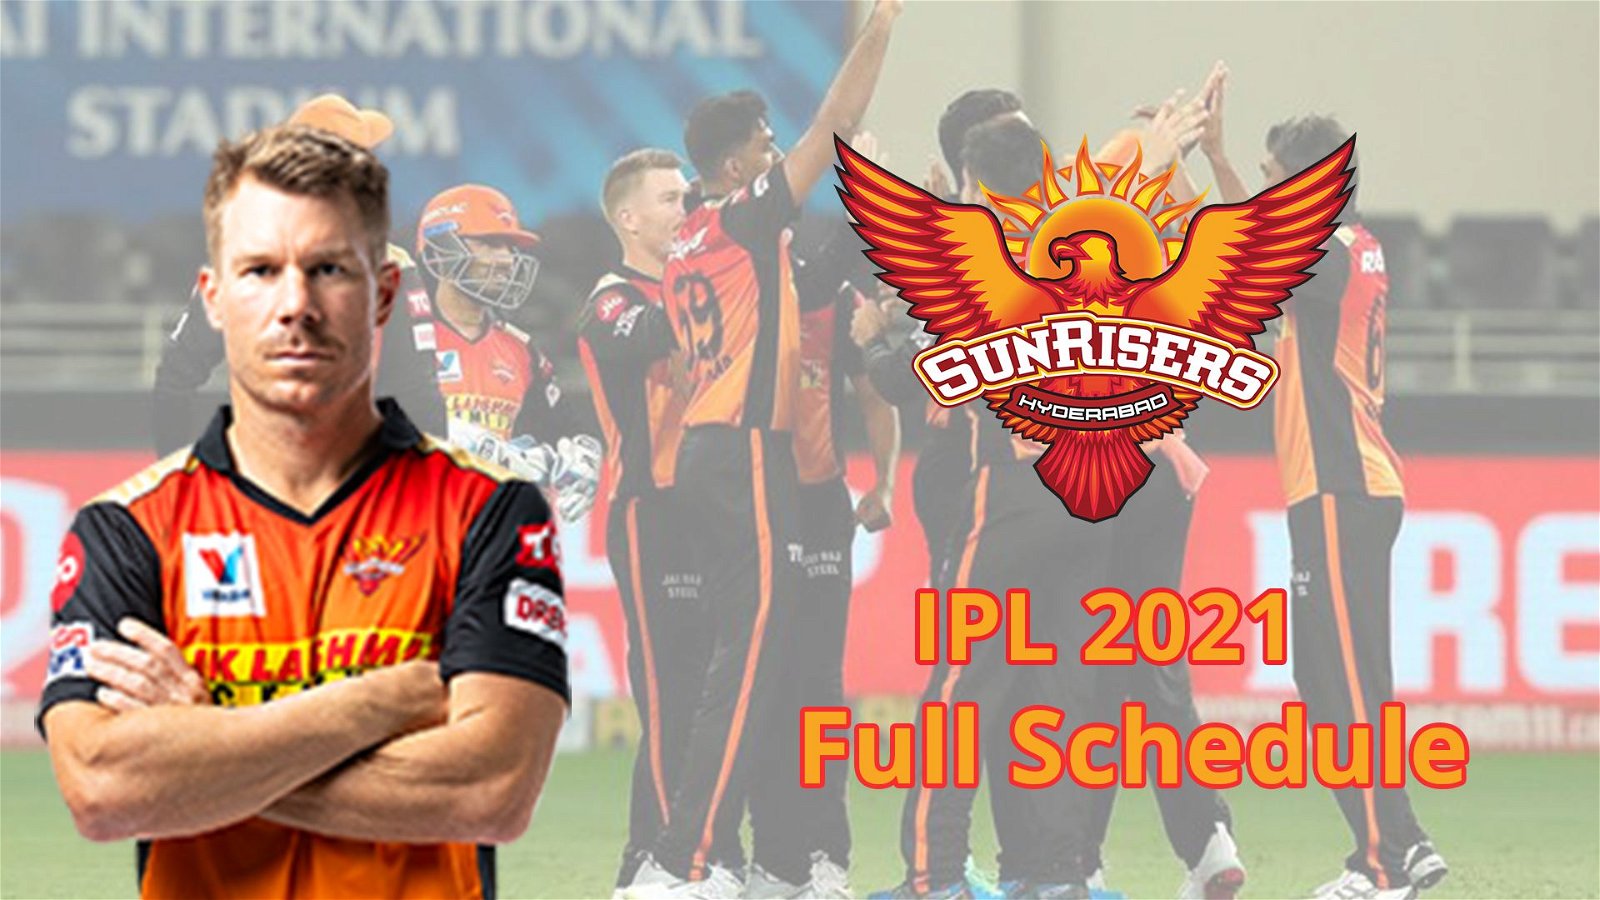 IPL 2021: Complete Schedule Of Sunrisers Hyderabad (SRH) For The Tournament